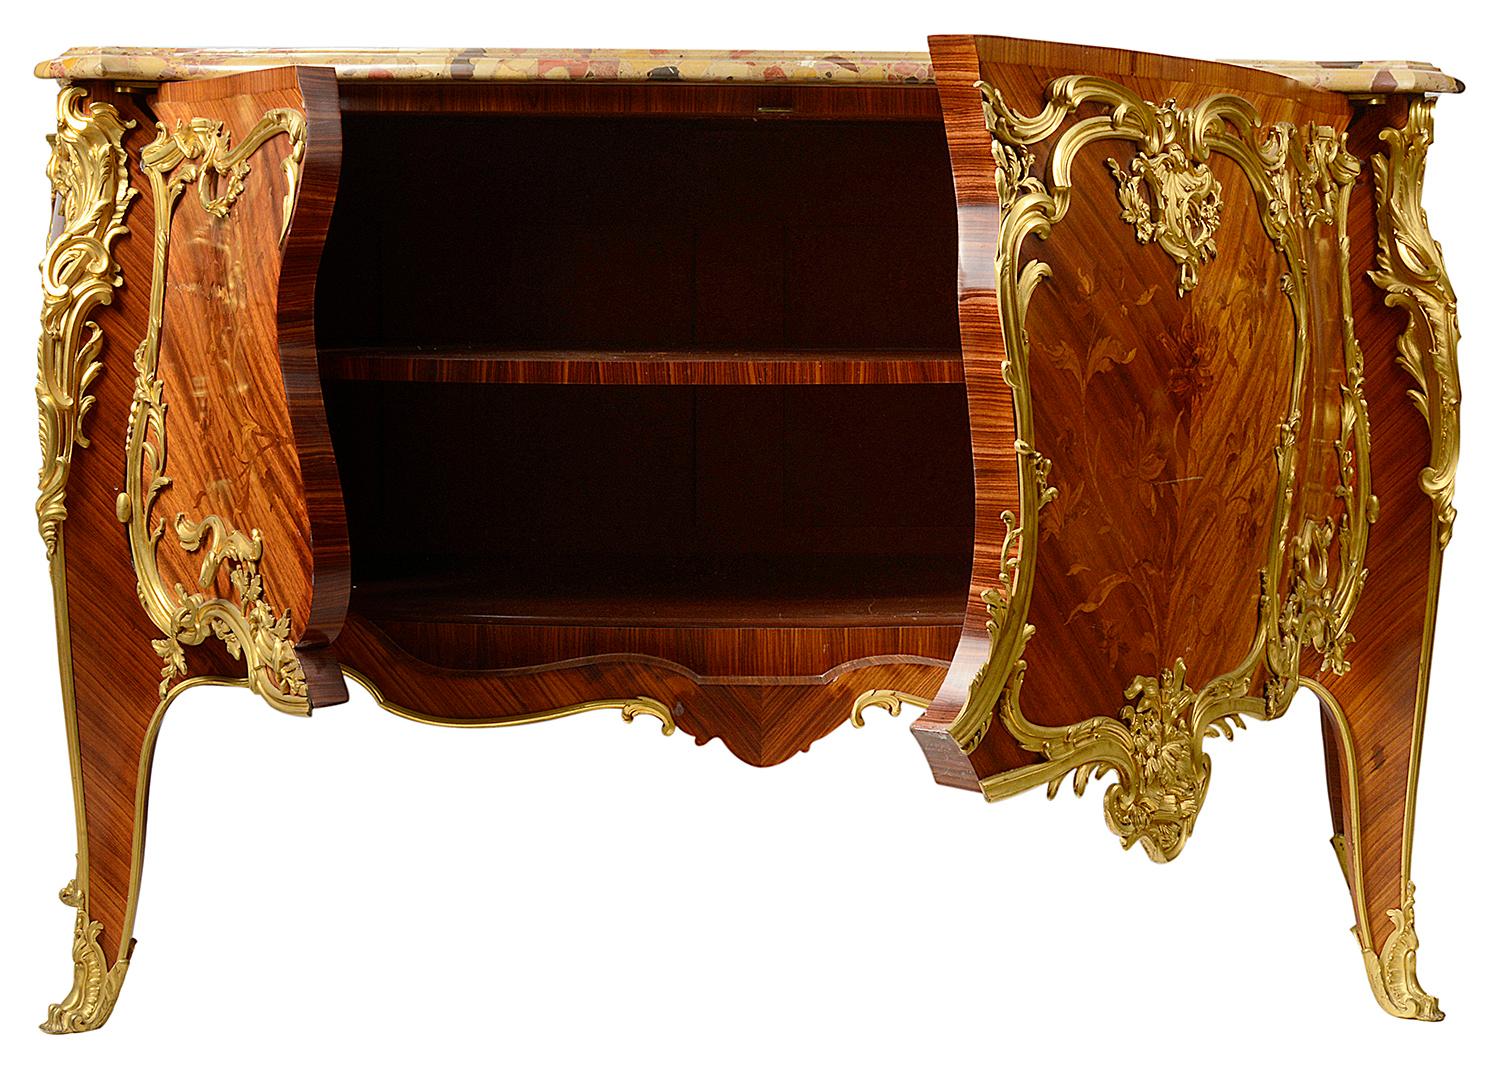 Francoise Linke Signed Bombe Commode, Late 19th Century For Sale 1